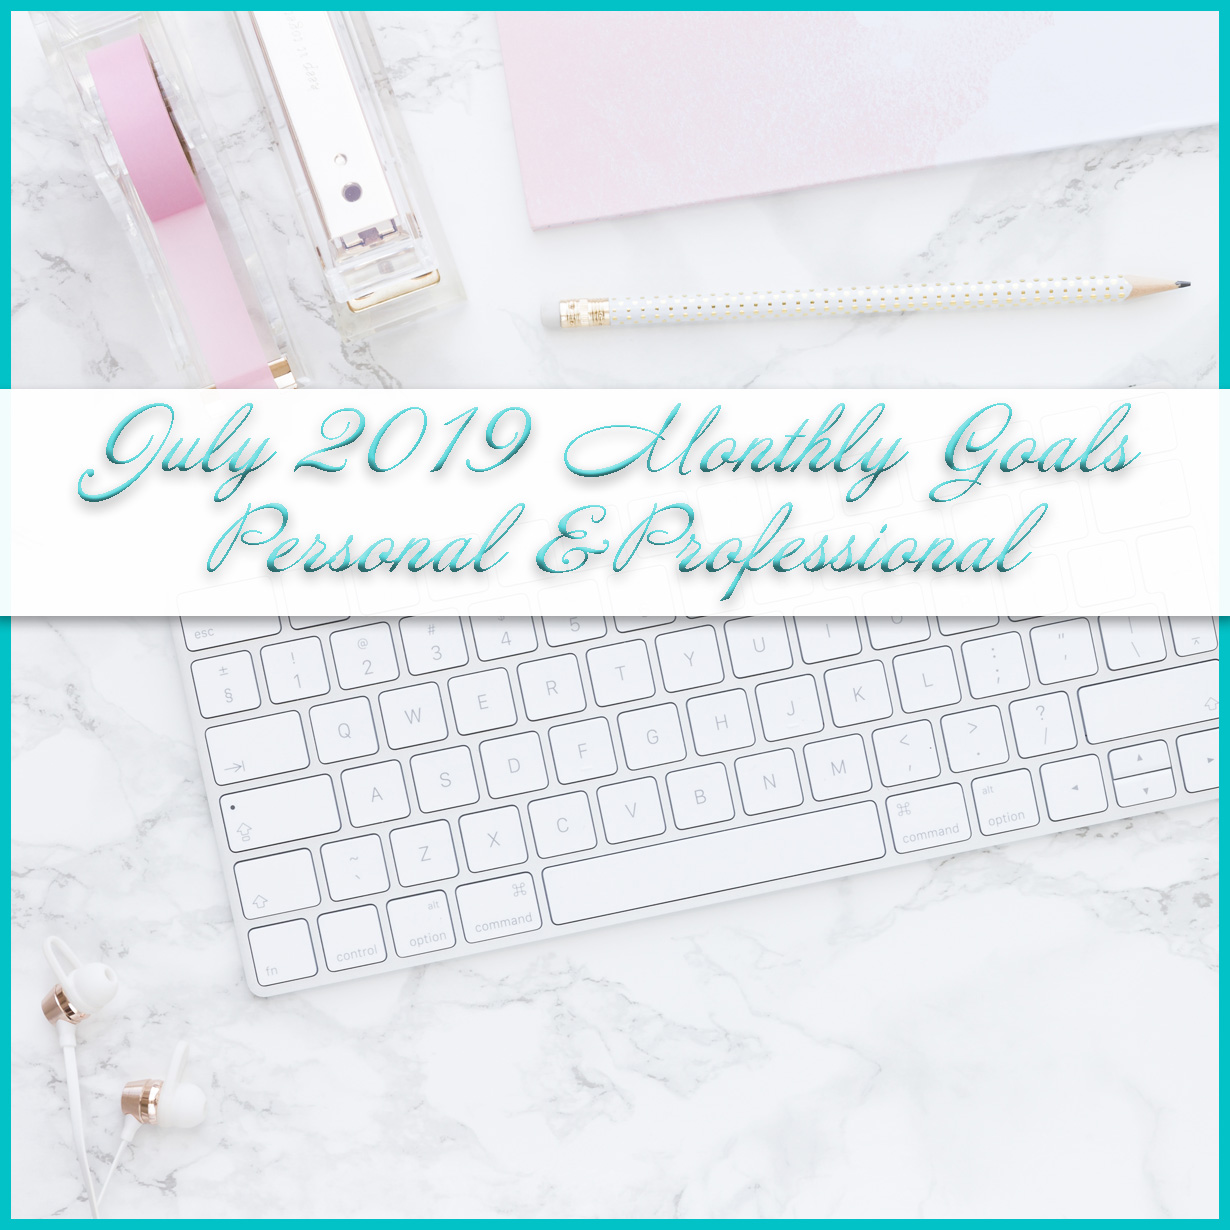 July 2019 Personal and Professional Goals